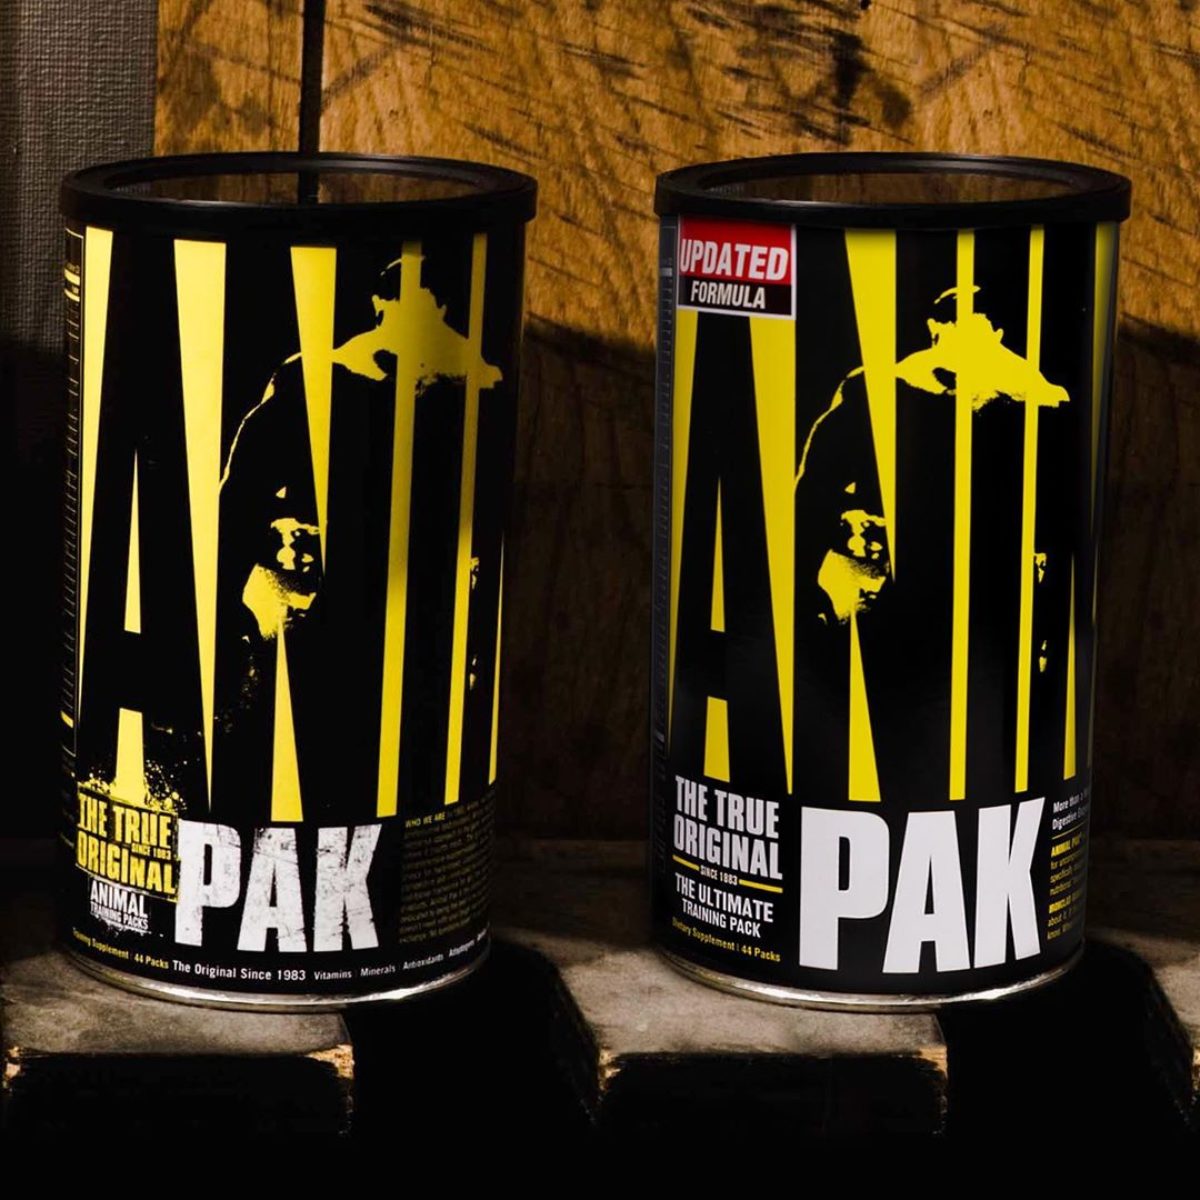 Universal Animal Pak: The Product That Created a Brand